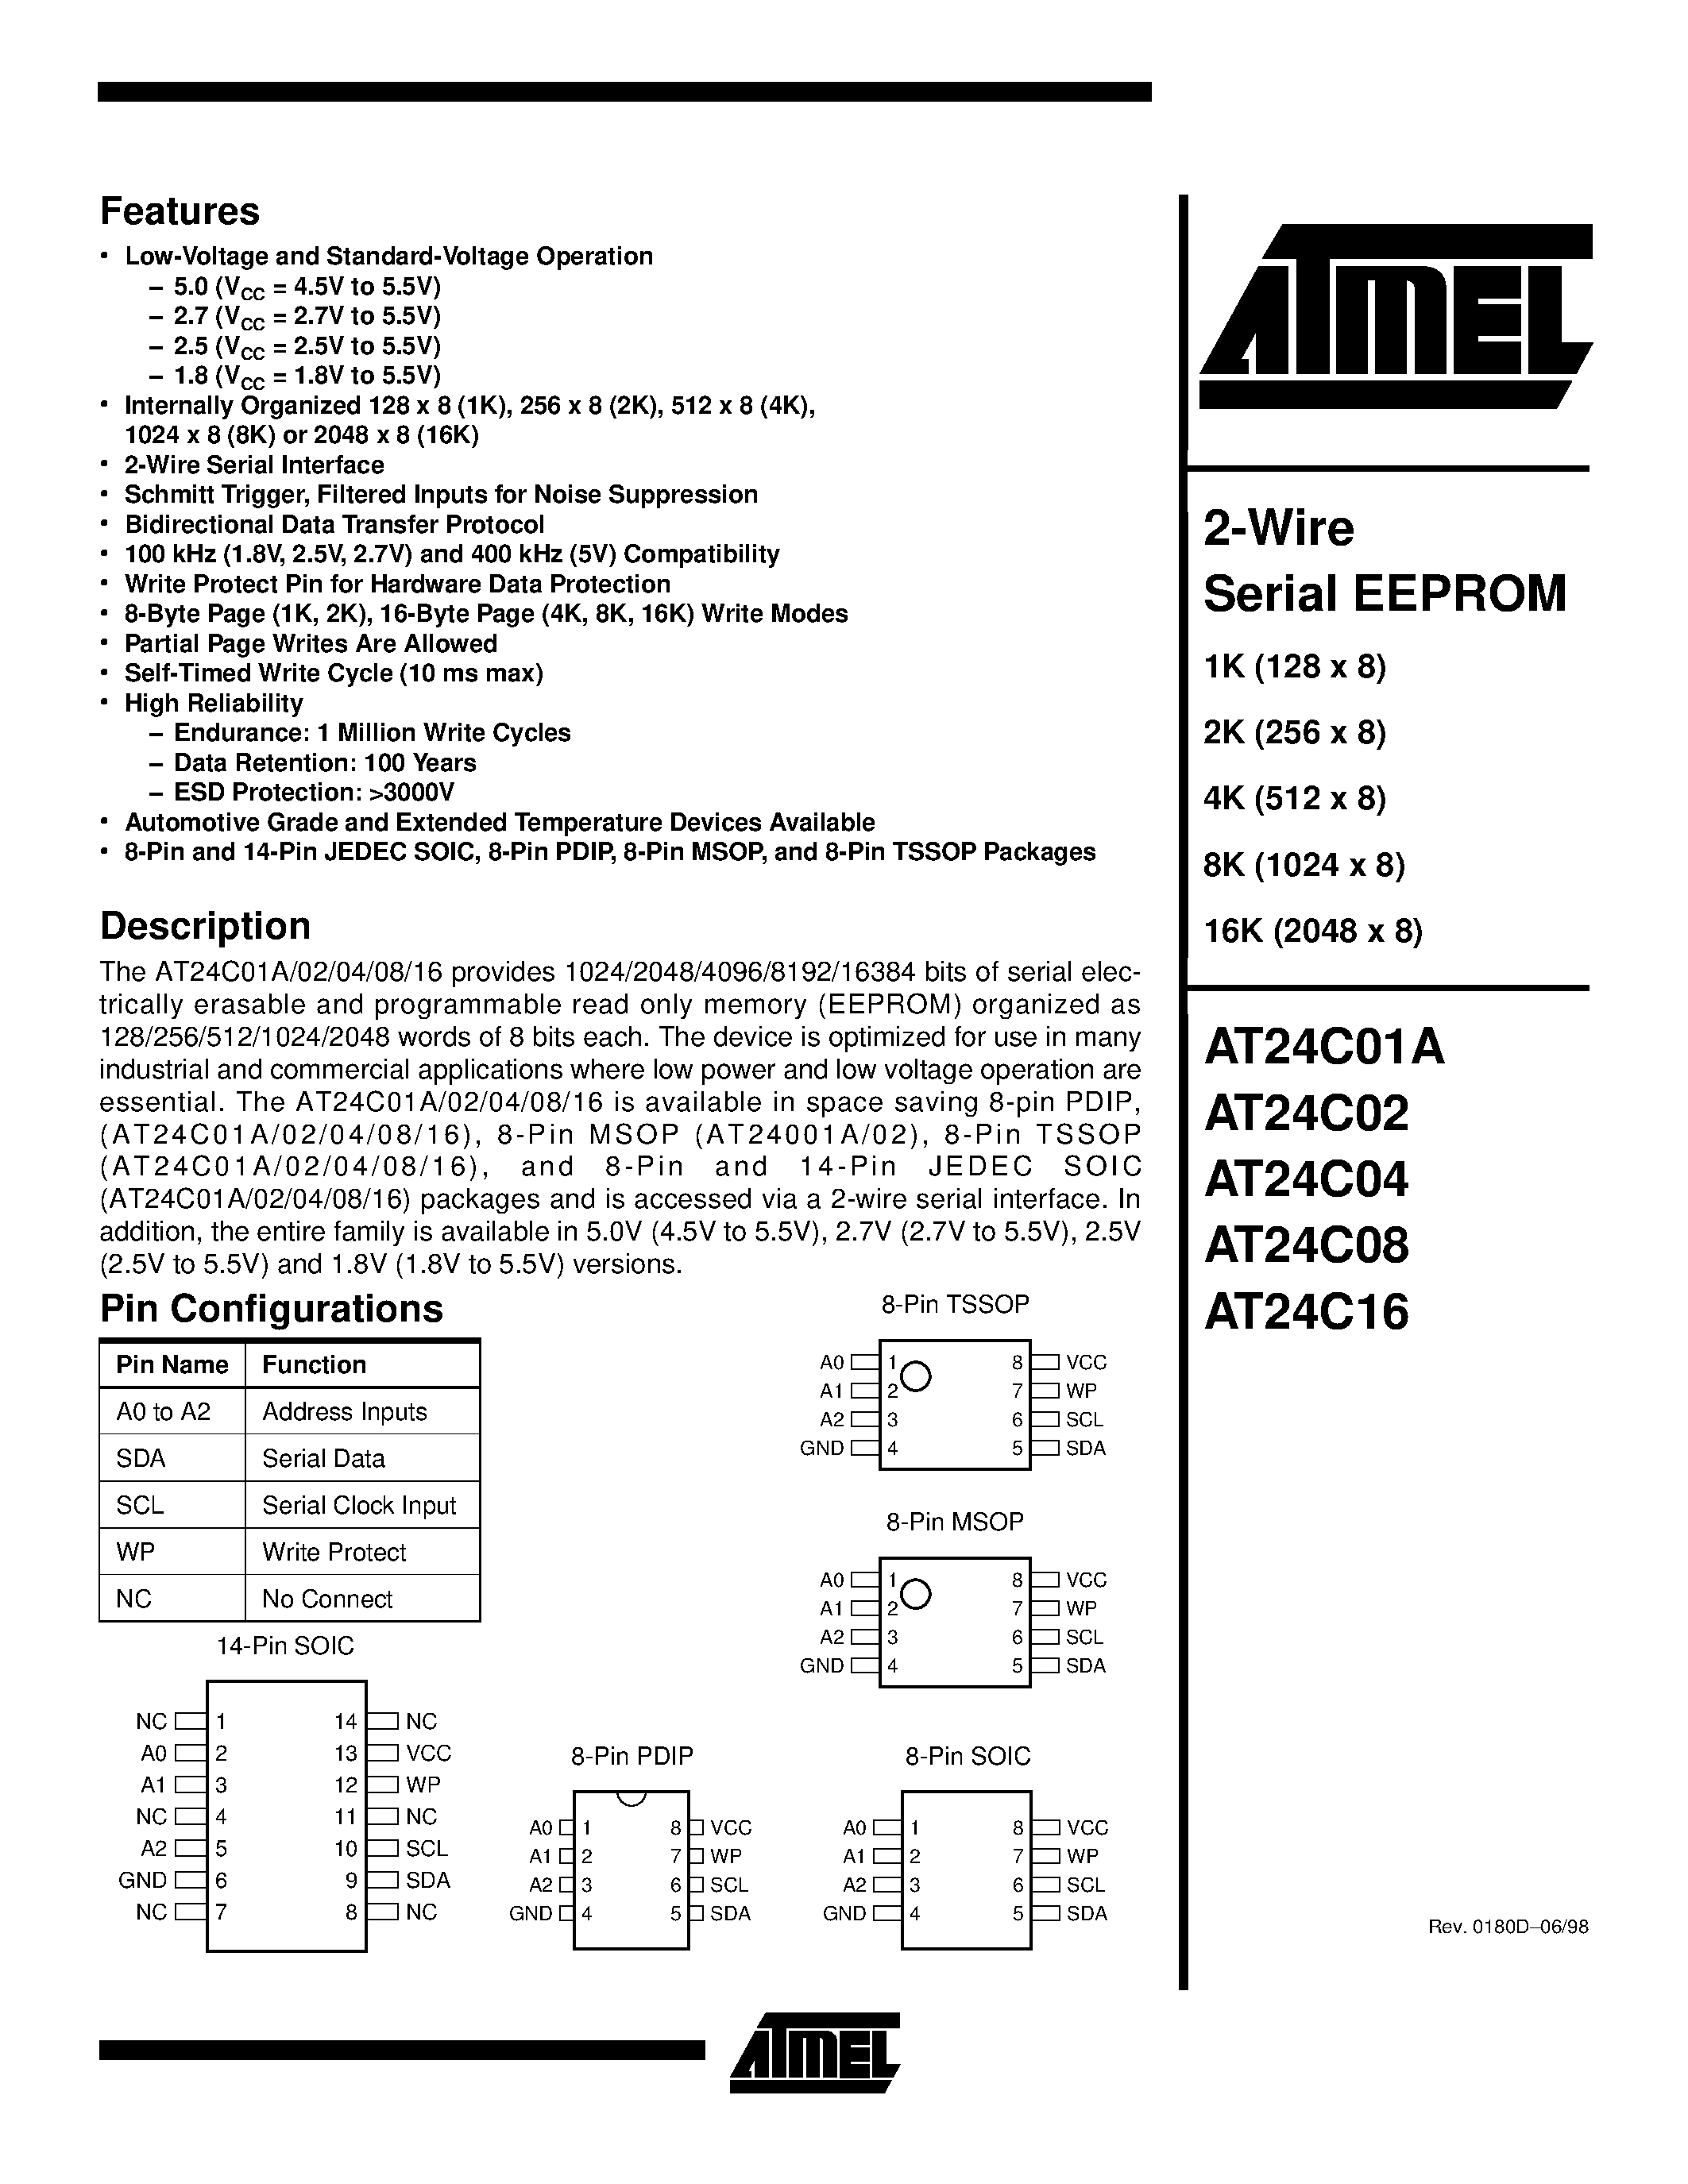 Datasheet AT24C08-10PC-2.5 - 2-Wire Serial EEPROM page 1